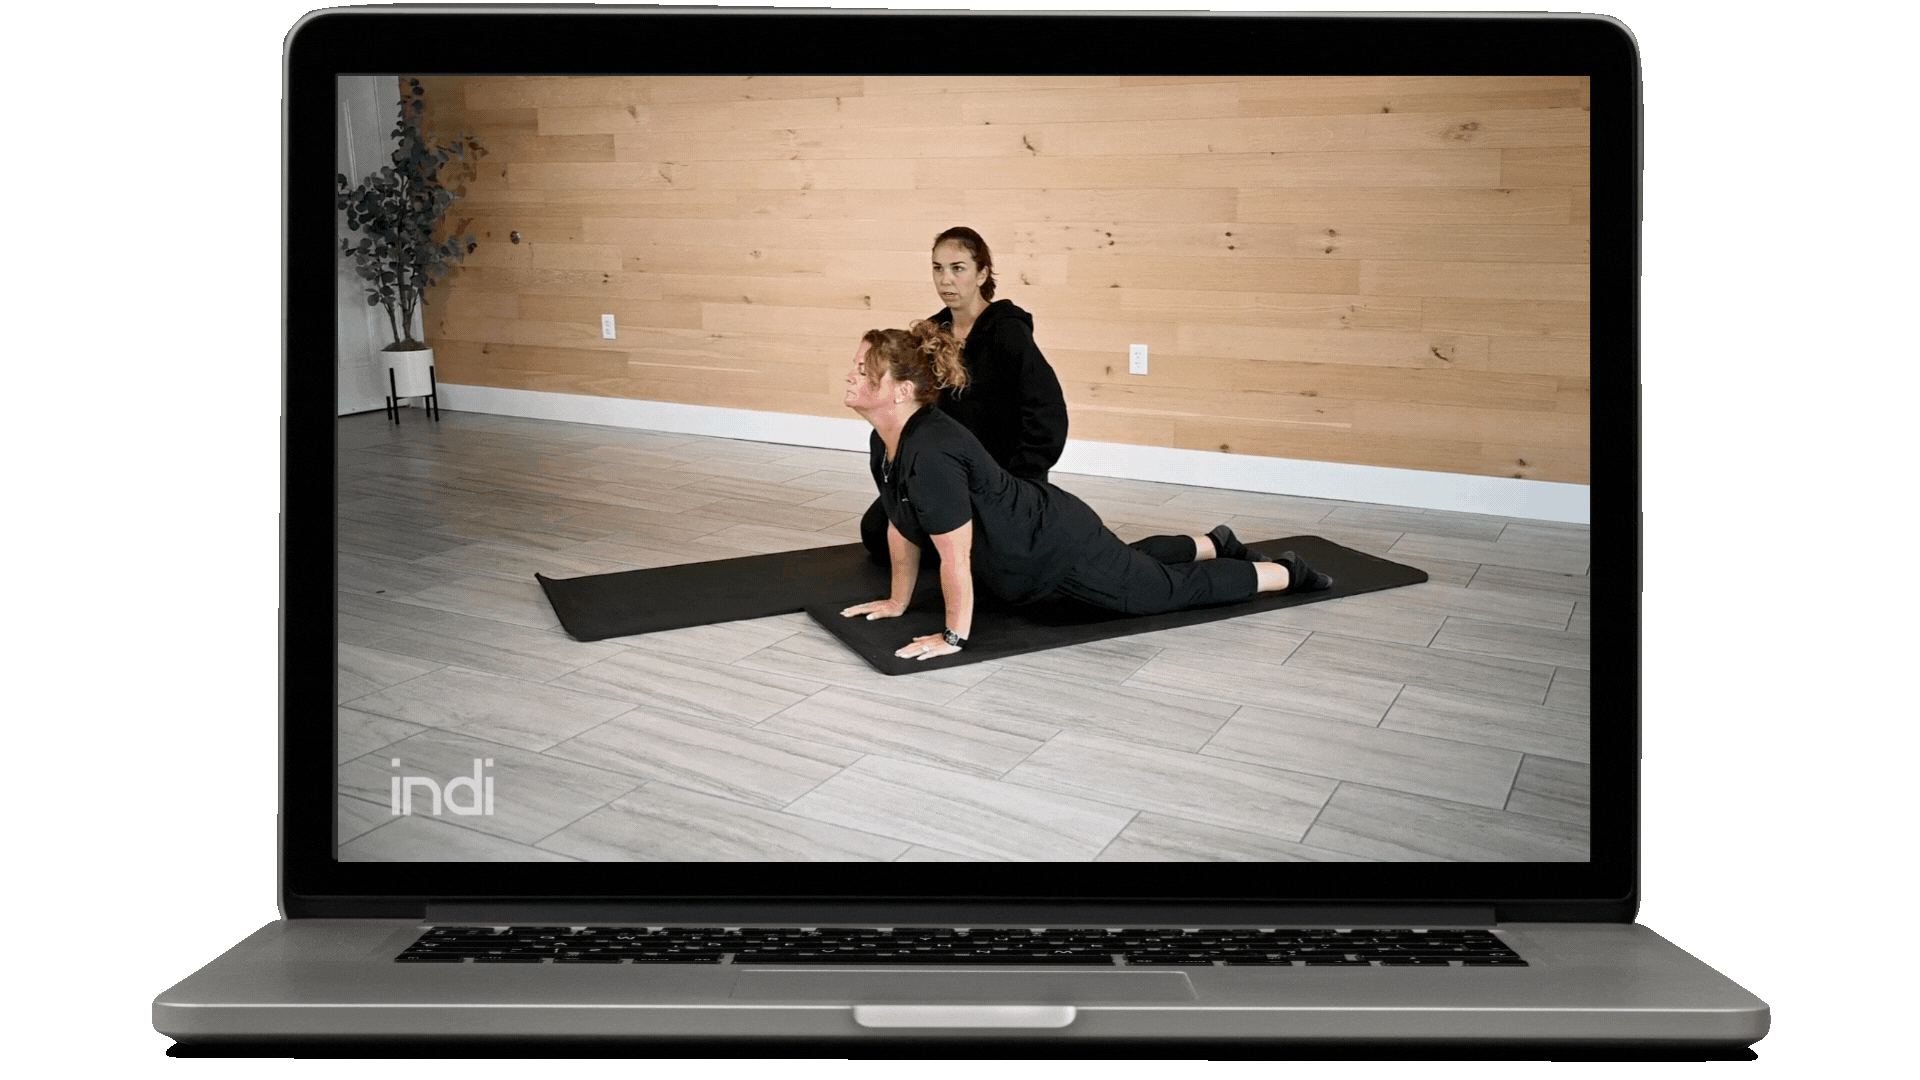 A computer shows a video of a workout video.